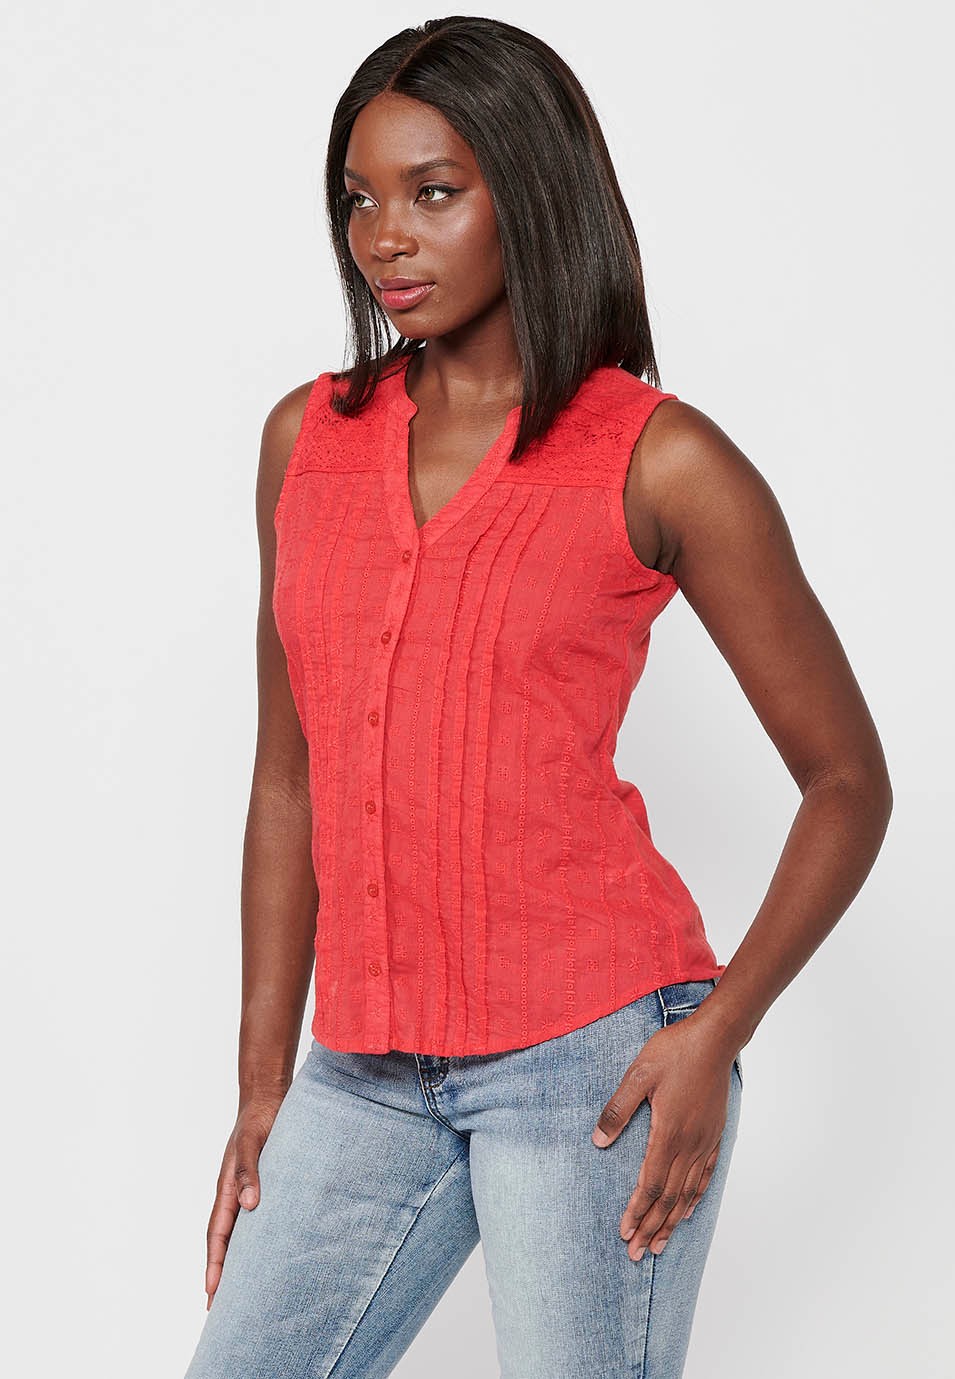 Embroidered Fabric Sleeveless Blouse with V-Neckline and Front Closure with Coral Color Buttons for Women 6